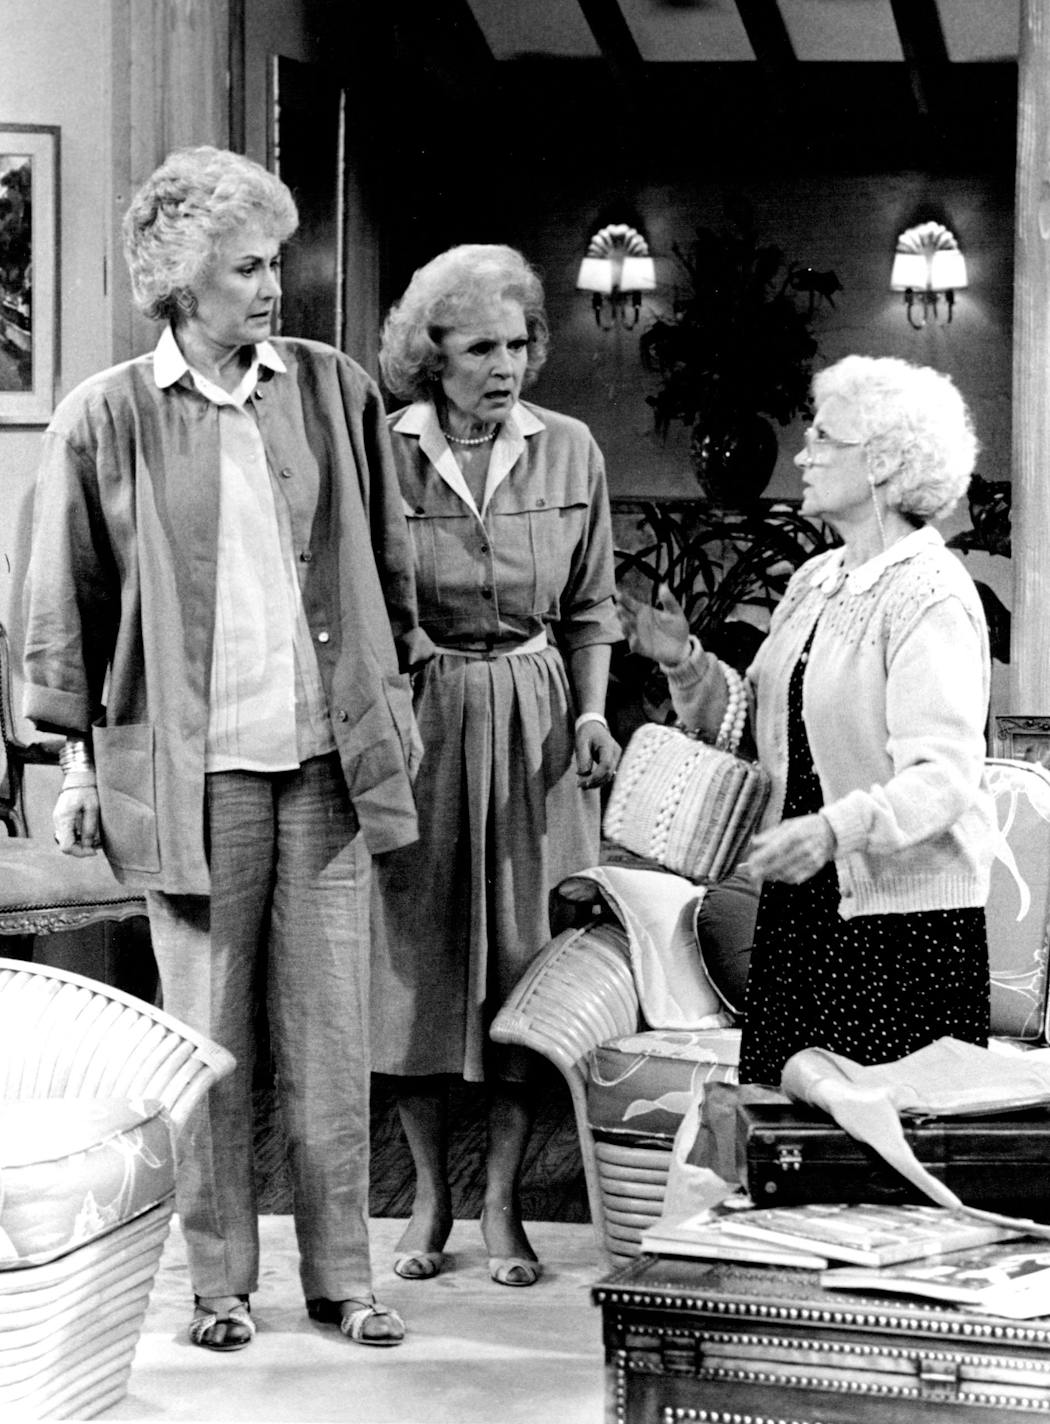 Bea Arthur, Betty White and Estelle Getty in a still from the premiere of 